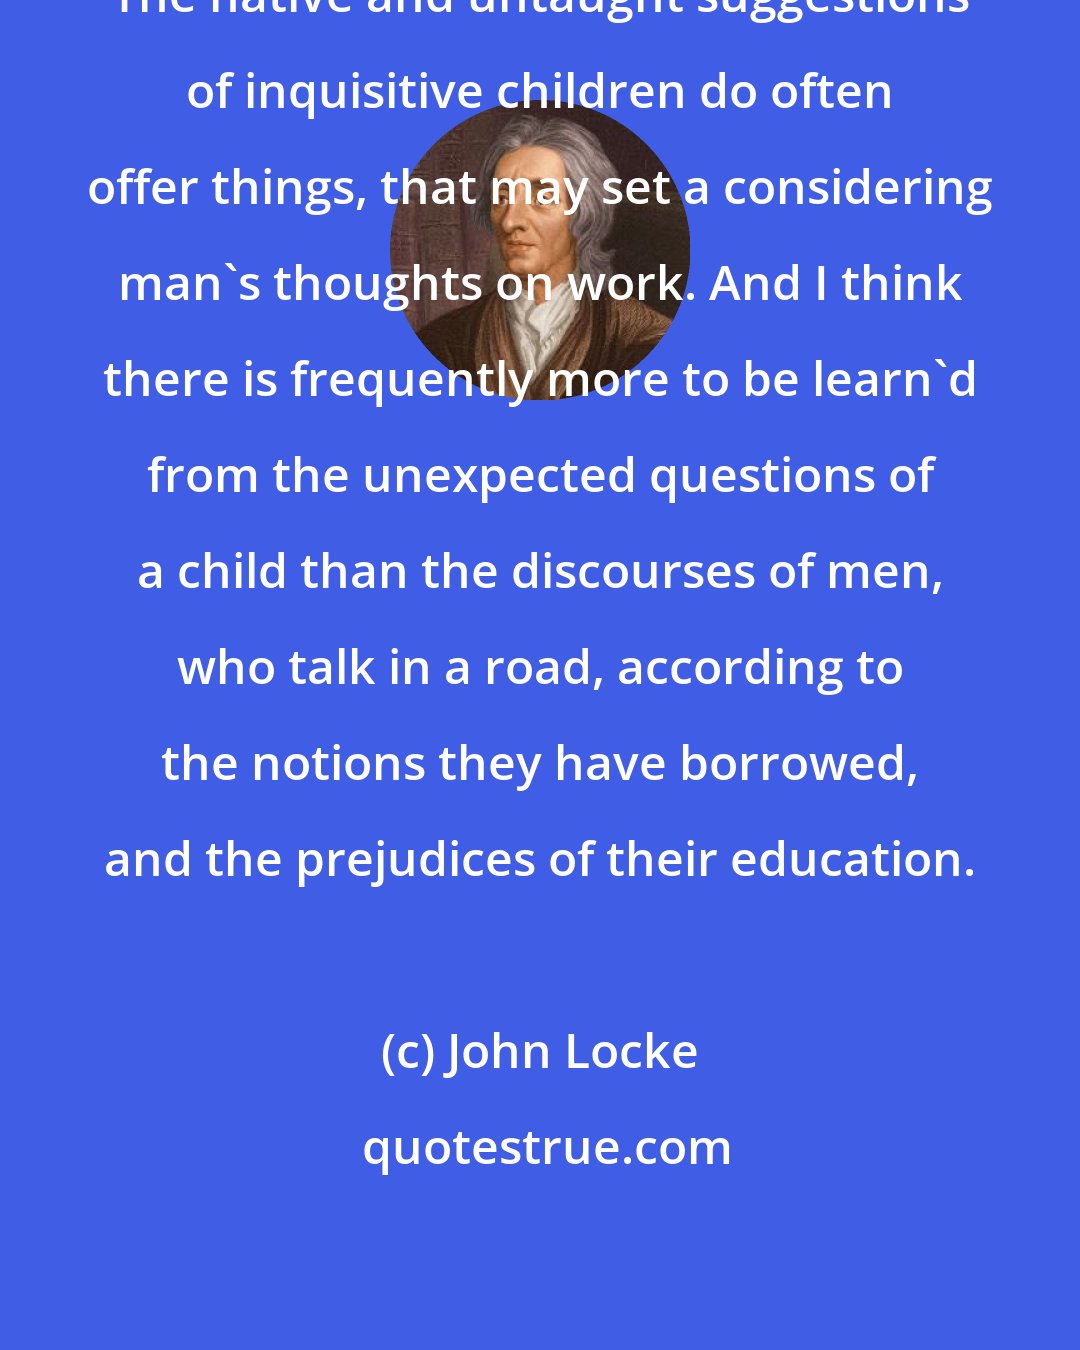 John Locke: The native and untaught suggestions of inquisitive children do often offer things, that may set a considering man's thoughts on work. And I think there is frequently more to be learn'd from the unexpected questions of a child than the discourses of men, who talk in a road, according to the notions they have borrowed, and the prejudices of their education.